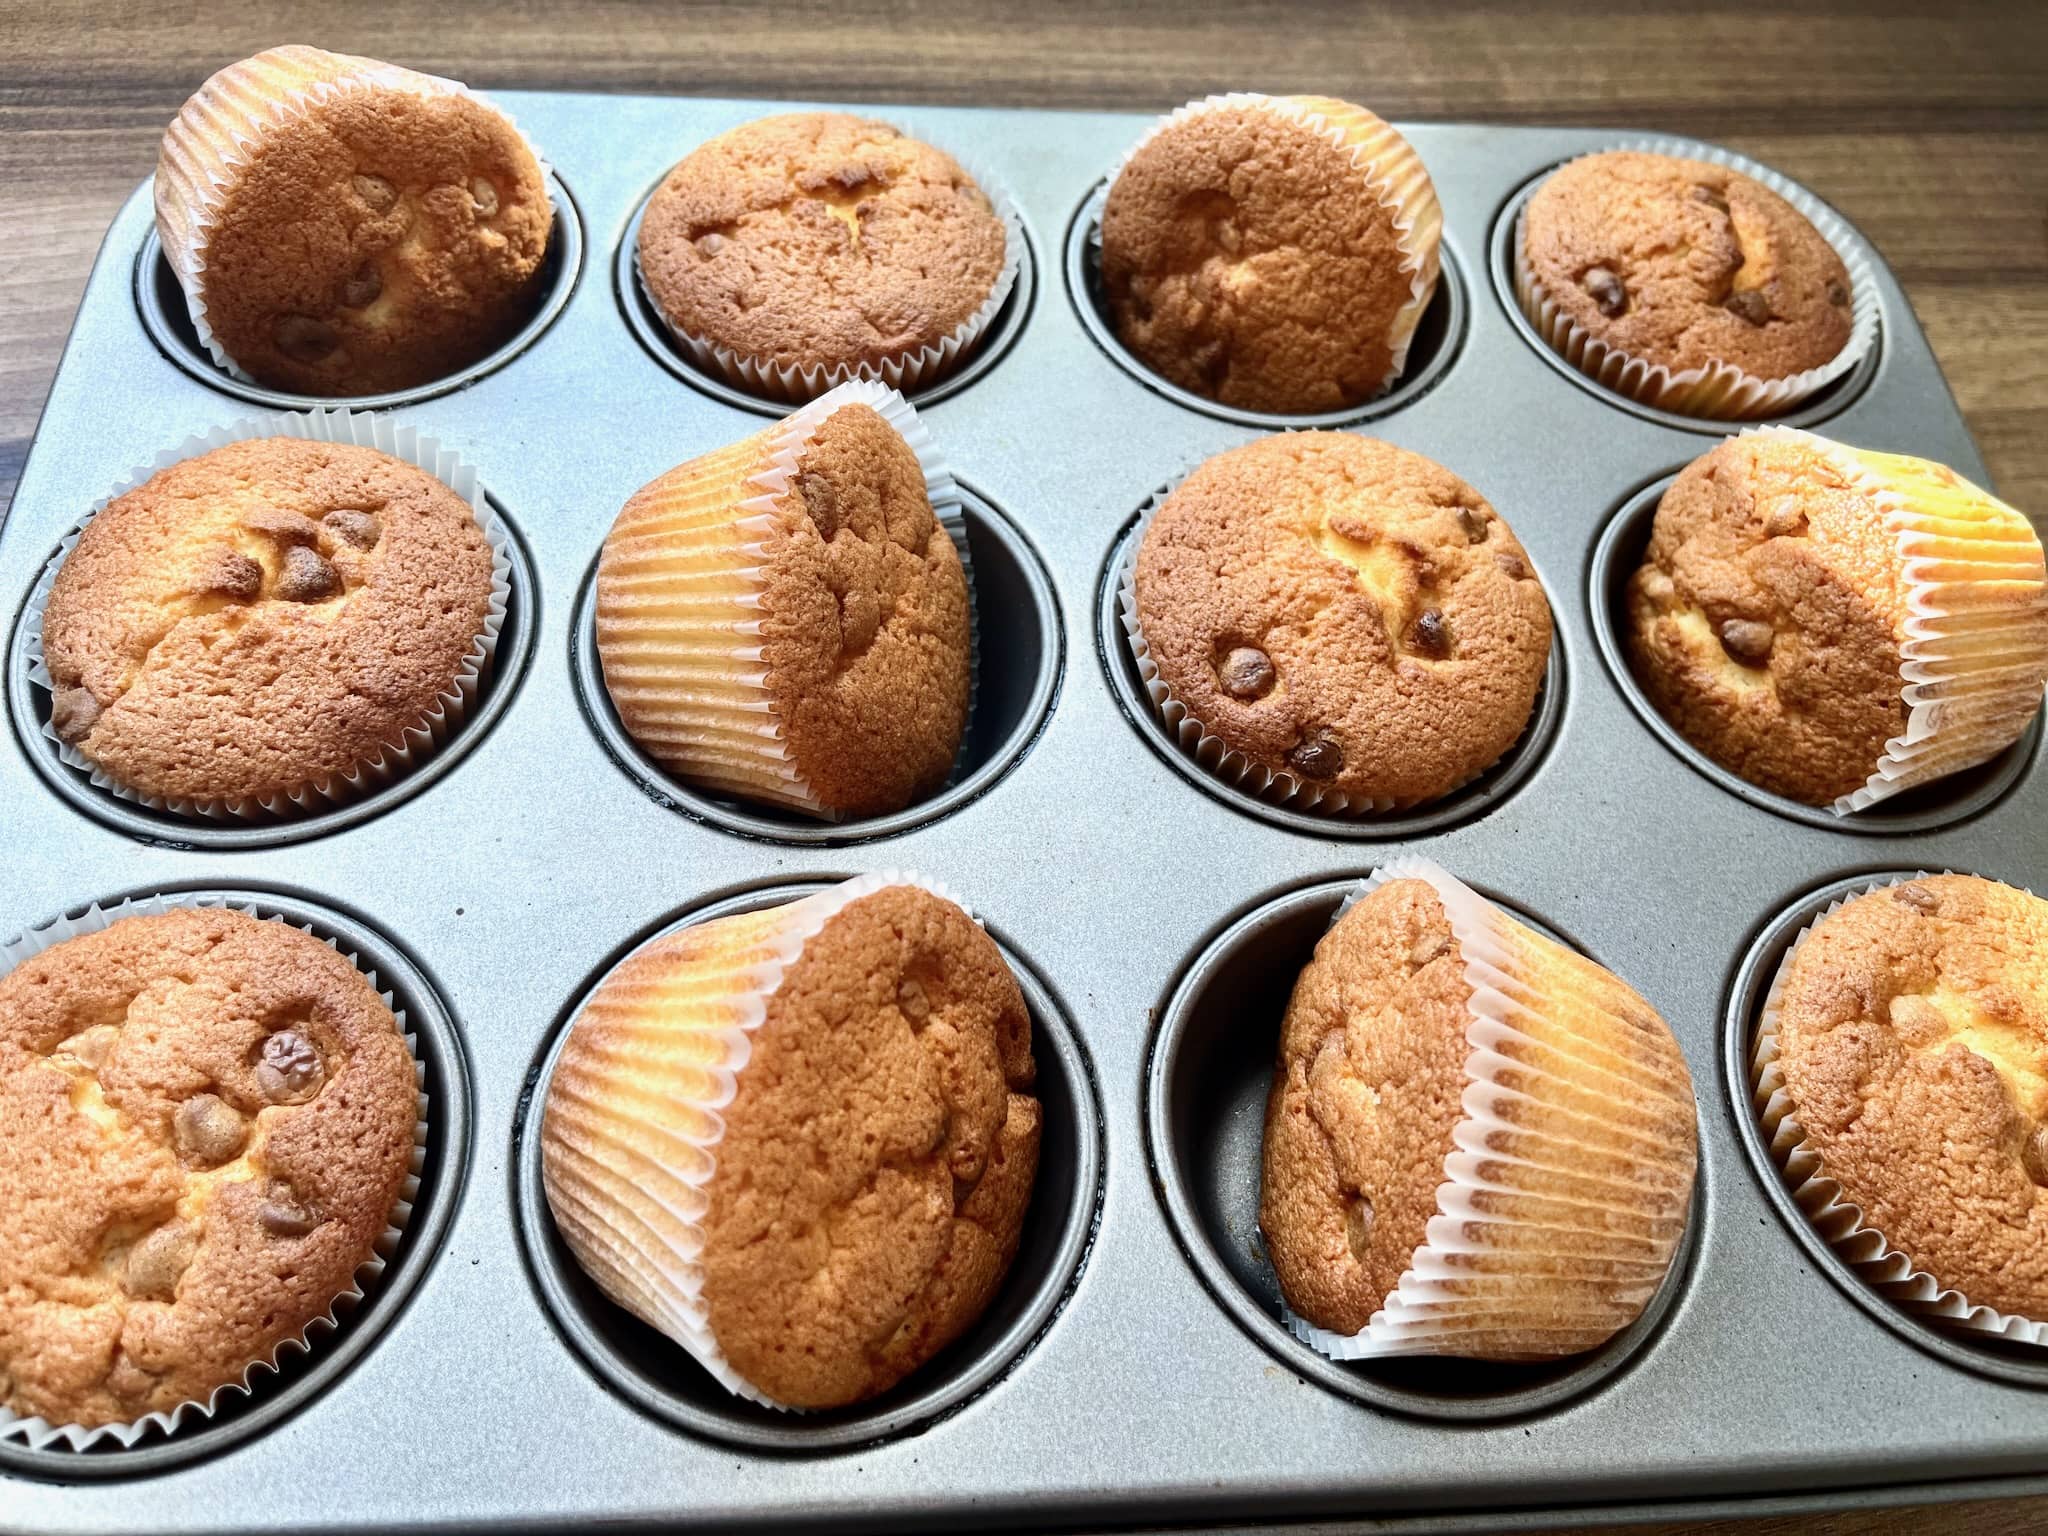 Cooled muffins, still in the tray